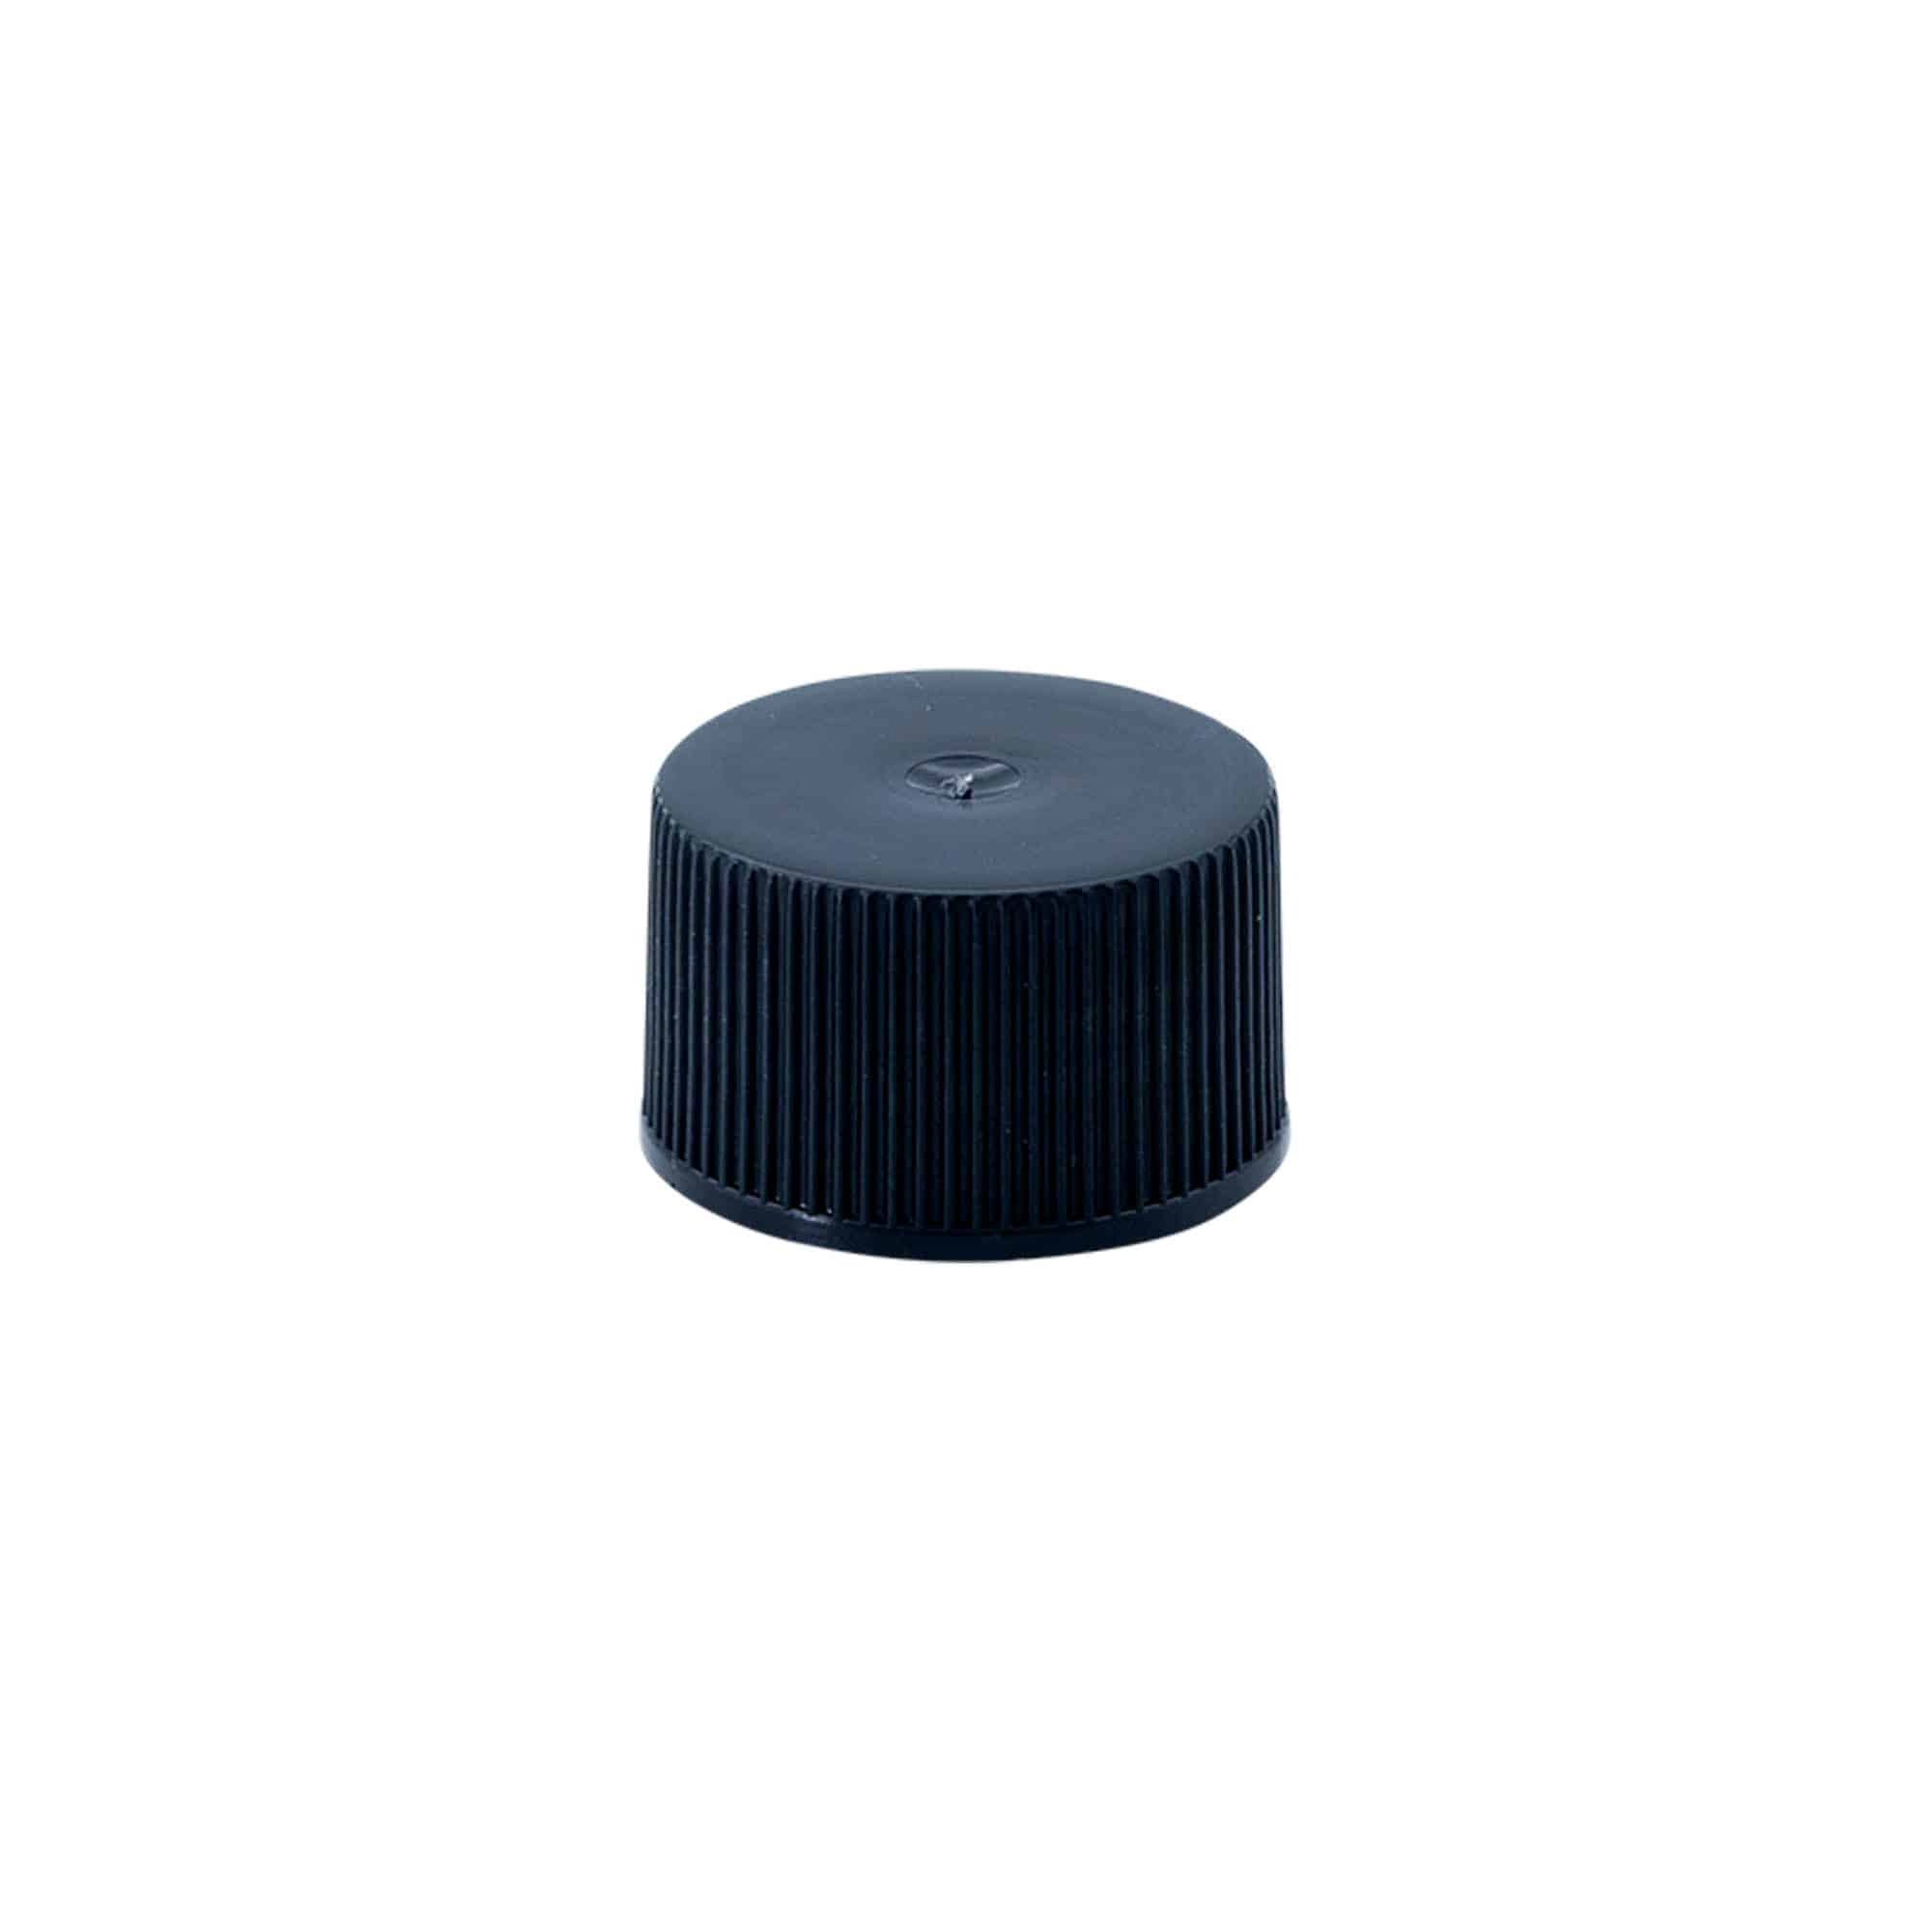 Screw cap with EPE insert, PE plastic, black, for opening: DIN 25